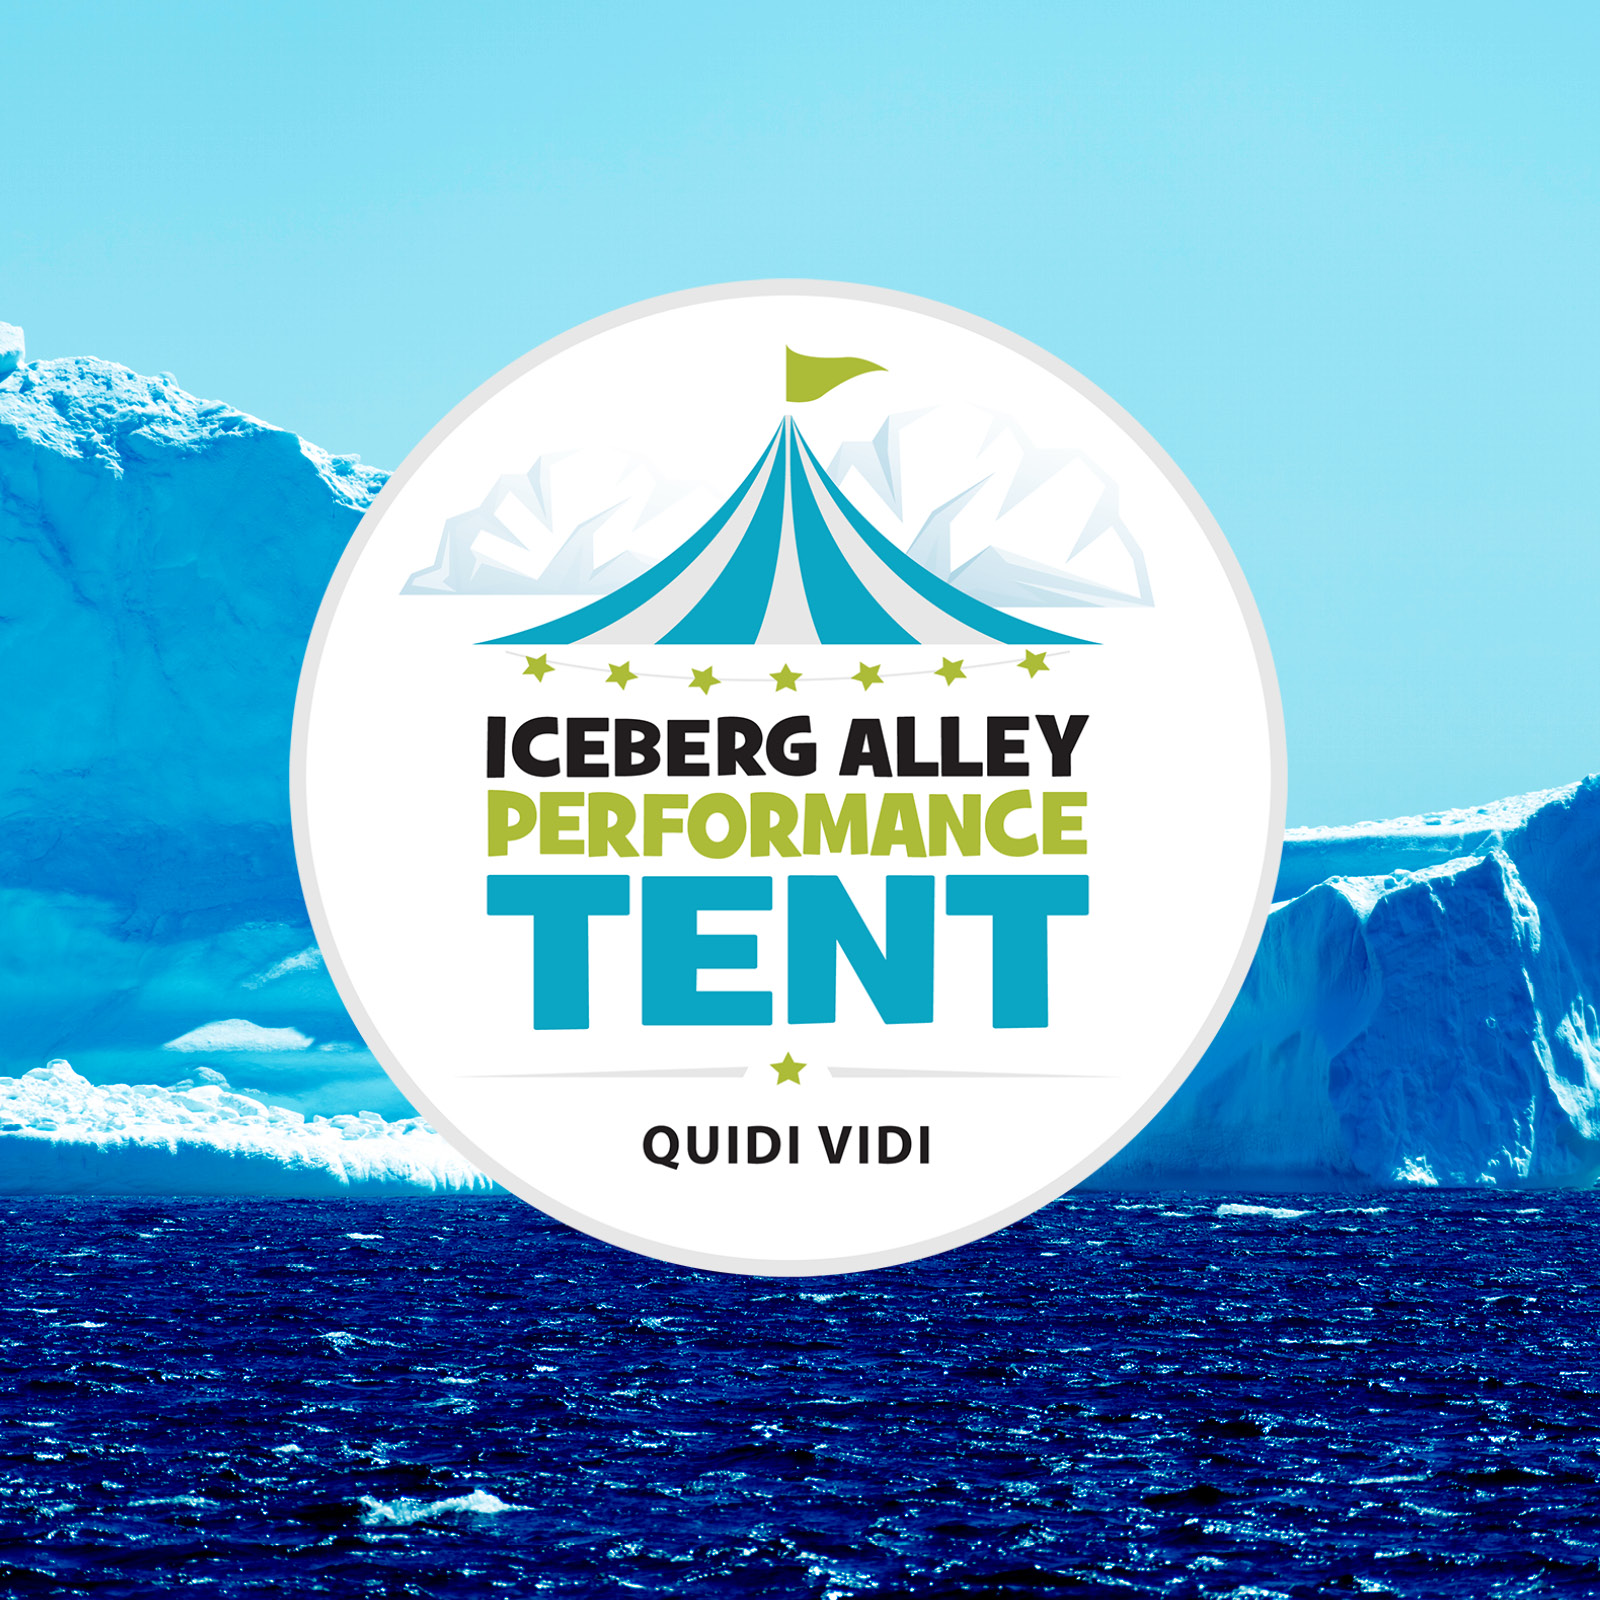 The Big Top returns to the banks of Quidi Vidi from June 14th-24th! St ...